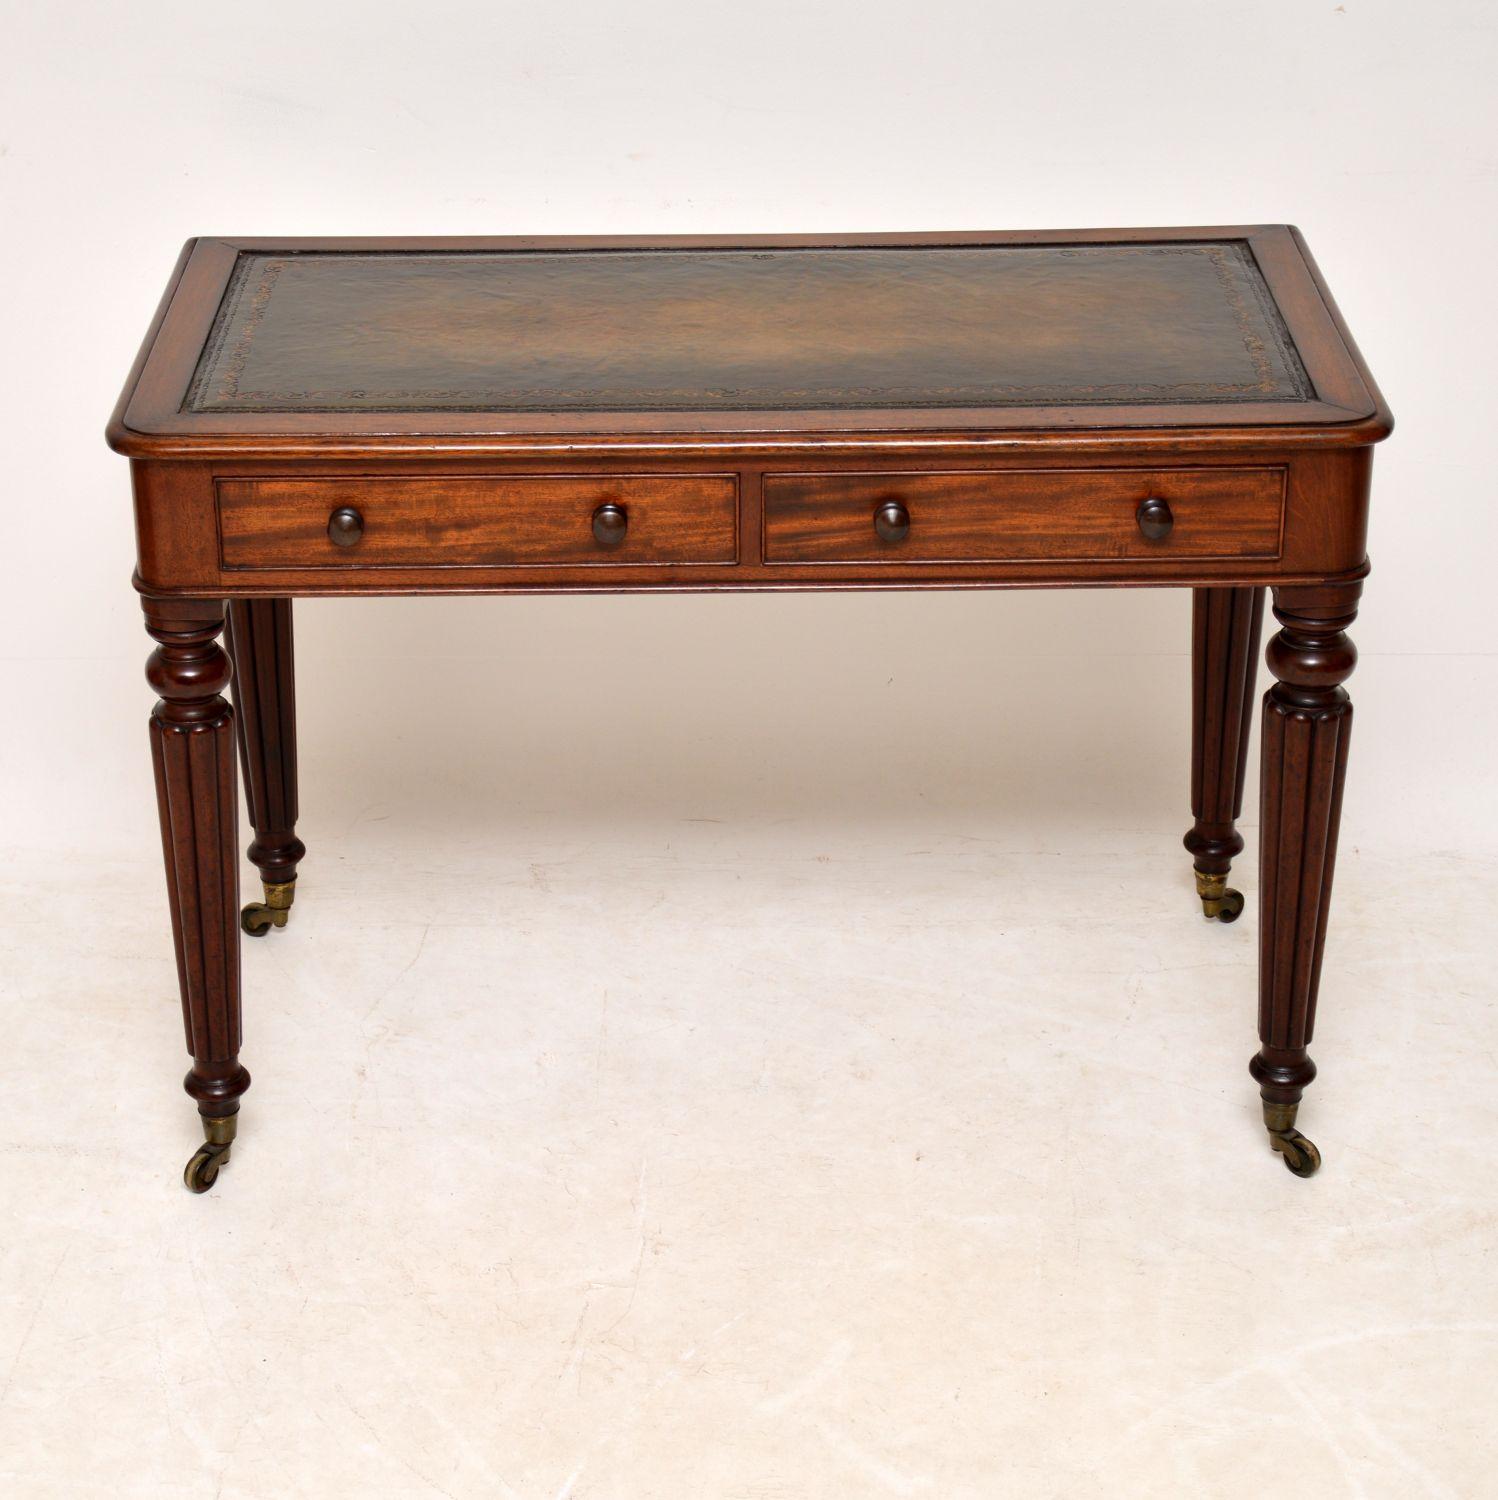 Fine quality antique Victorian mahogany writing table in excellent original condition. Dating to circa 1860s period, it has a polished back, so can be free standing. It has a hand colored tooled leather writing surface, two drawers, with turned